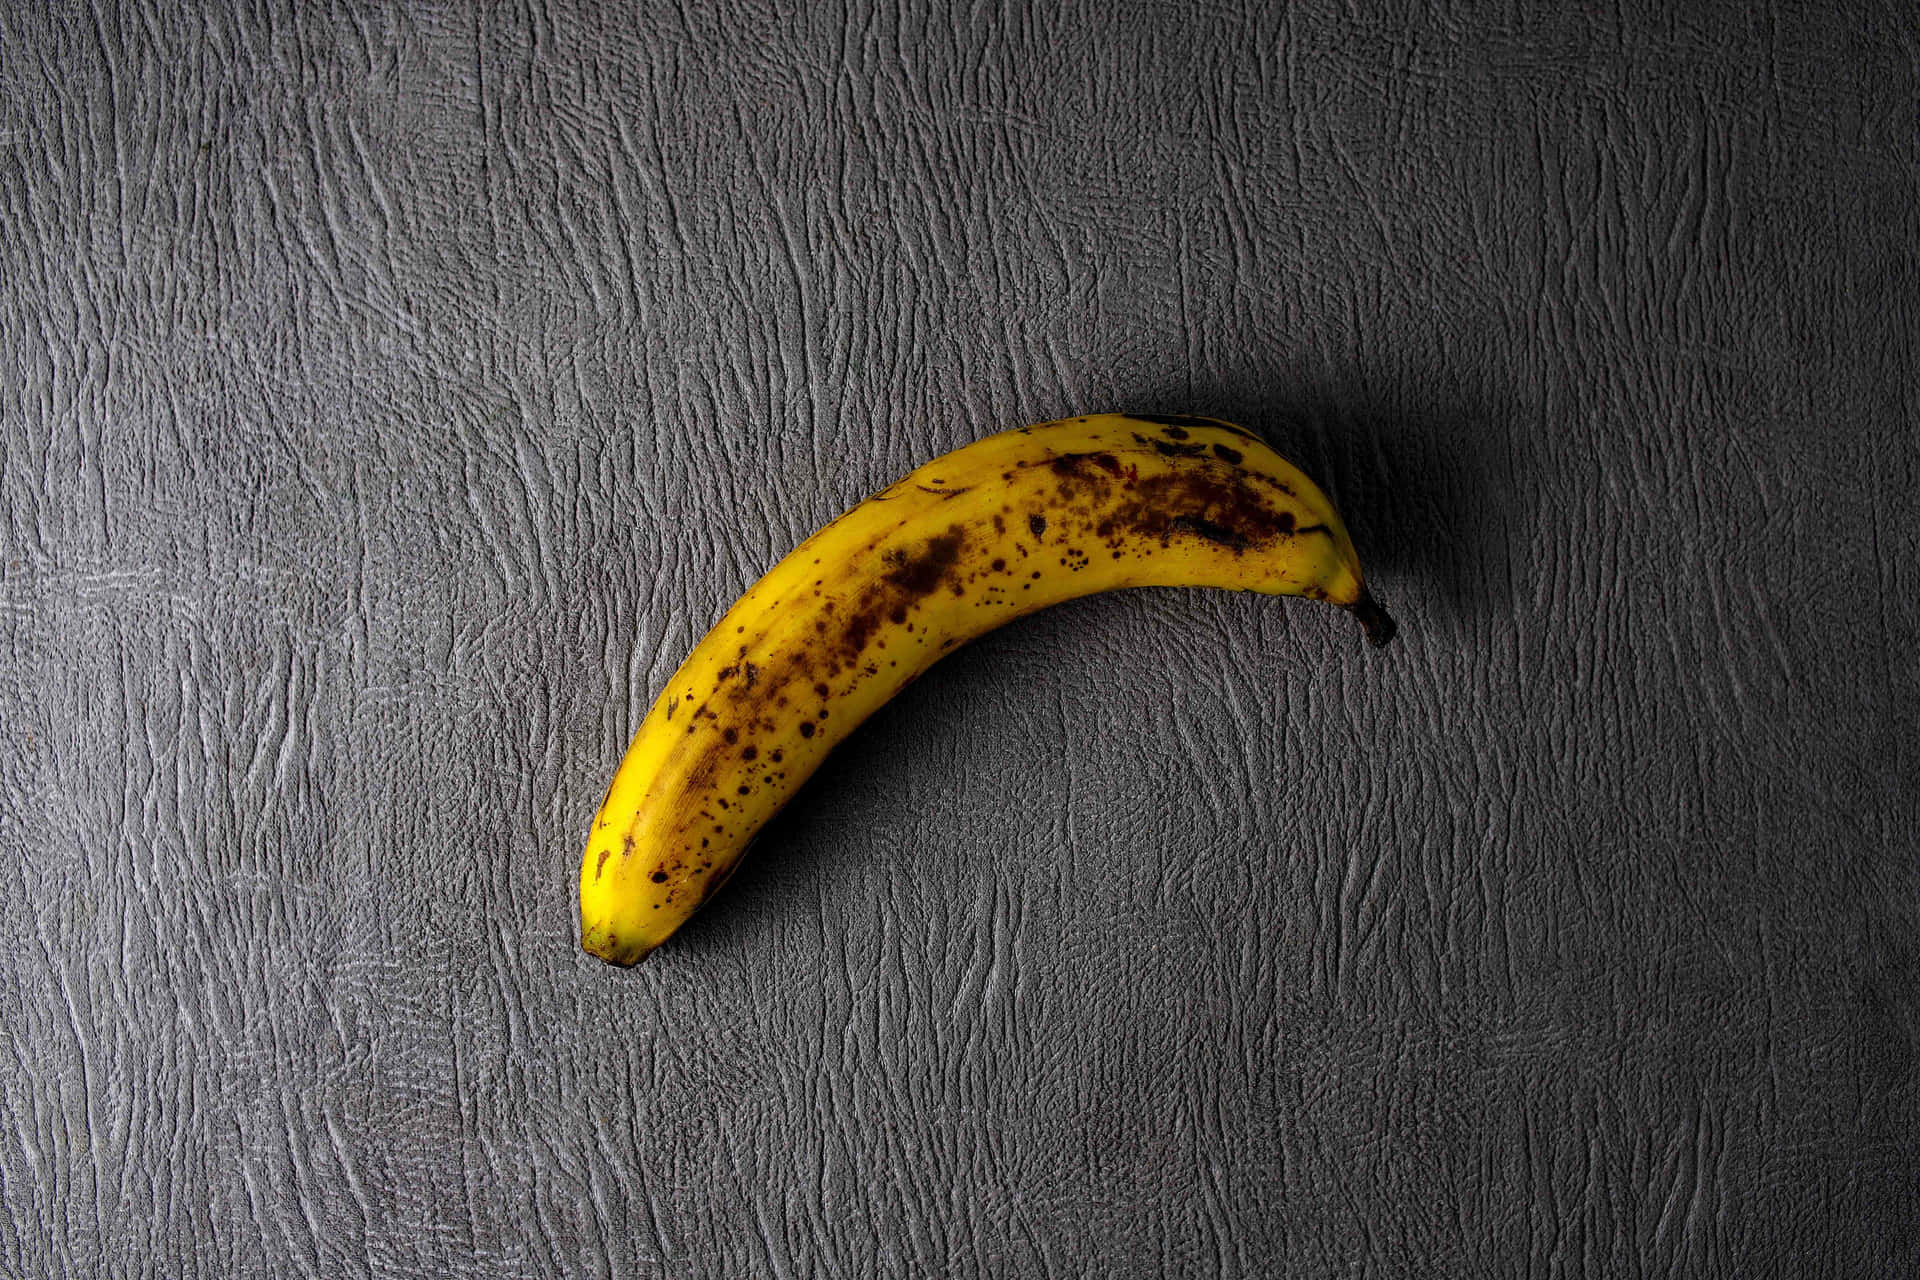 A beautiful and ripe delicious banana, ready for your enjoyment.